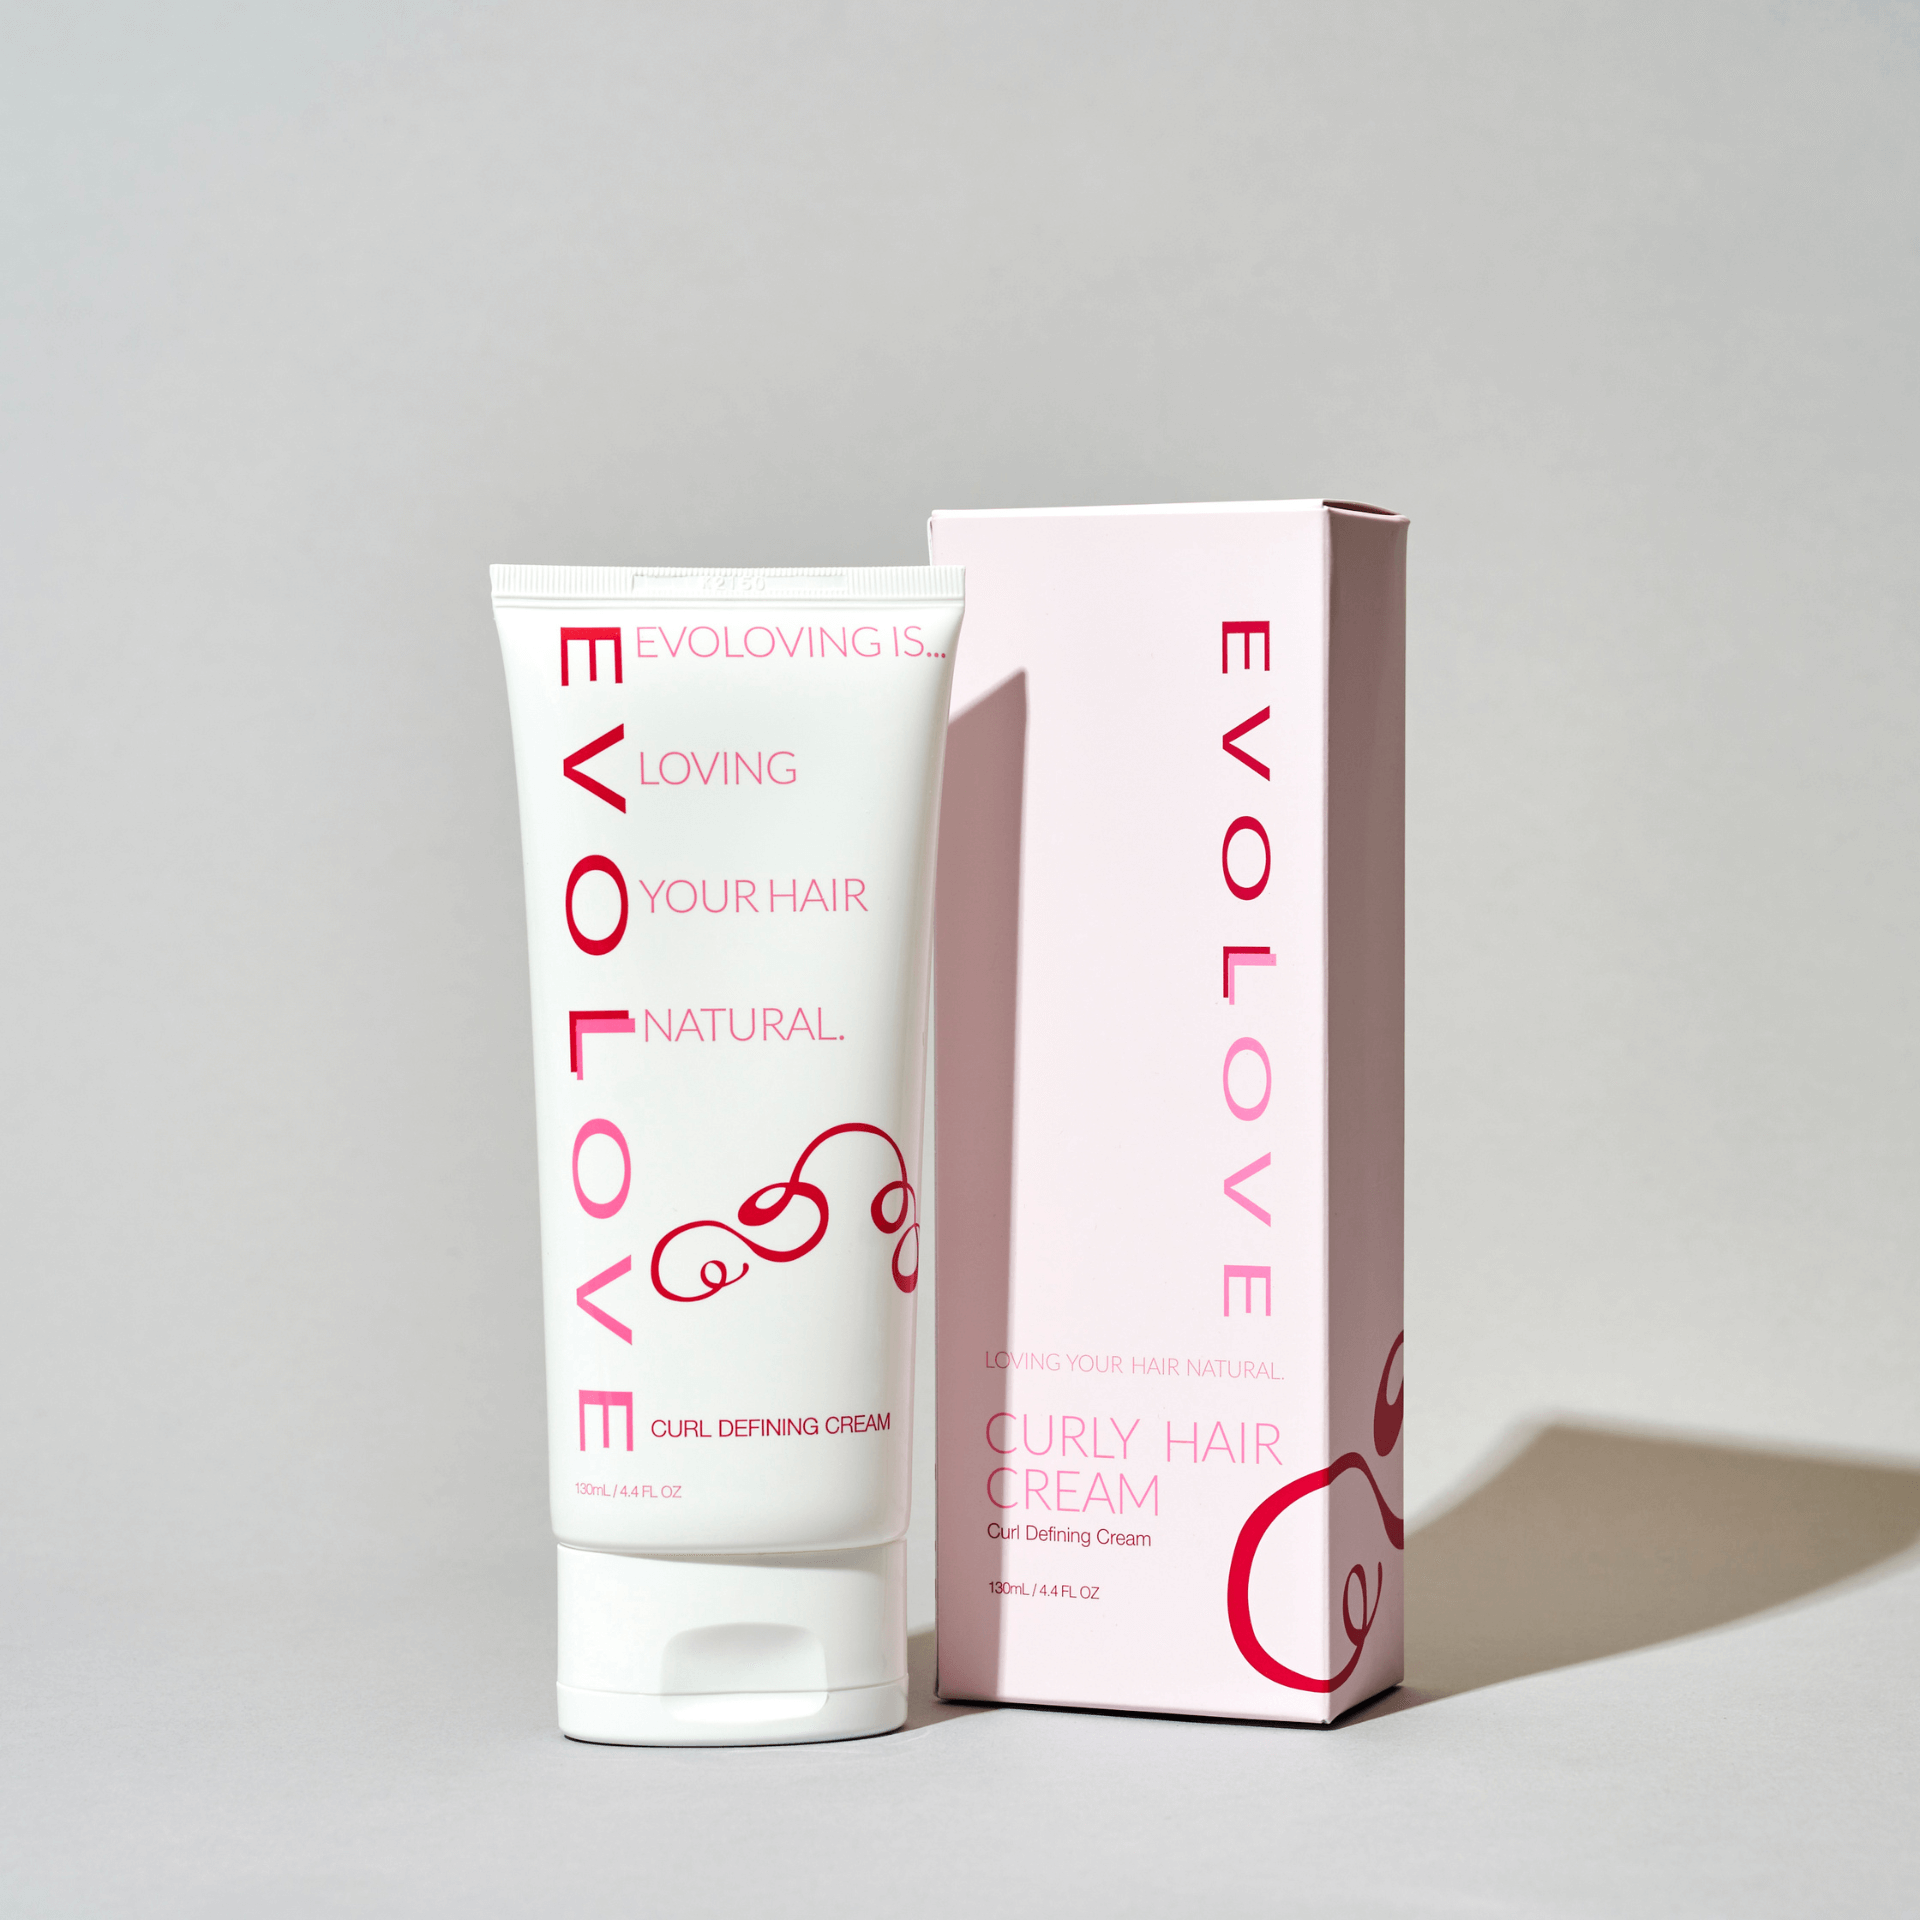 A lightweight curl defining cream for curly hair.